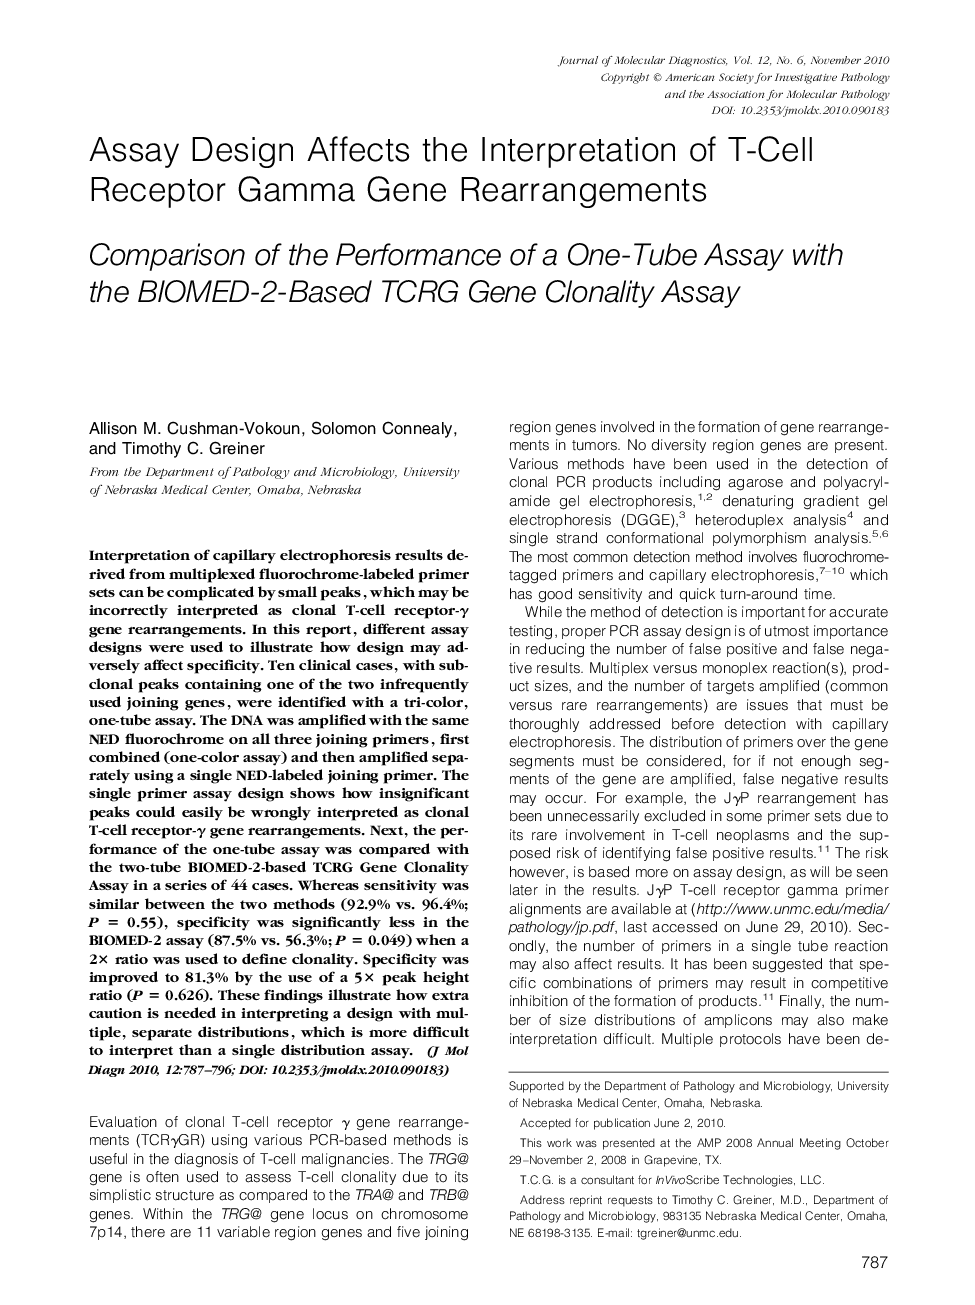 Assay Design Affects the Interpretation of T-Cell Receptor Gamma Gene Rearrangements : Comparison of the Performance of a One-Tube Assay with the BIOMED-2-Based TCRG Gene Clonality Assay